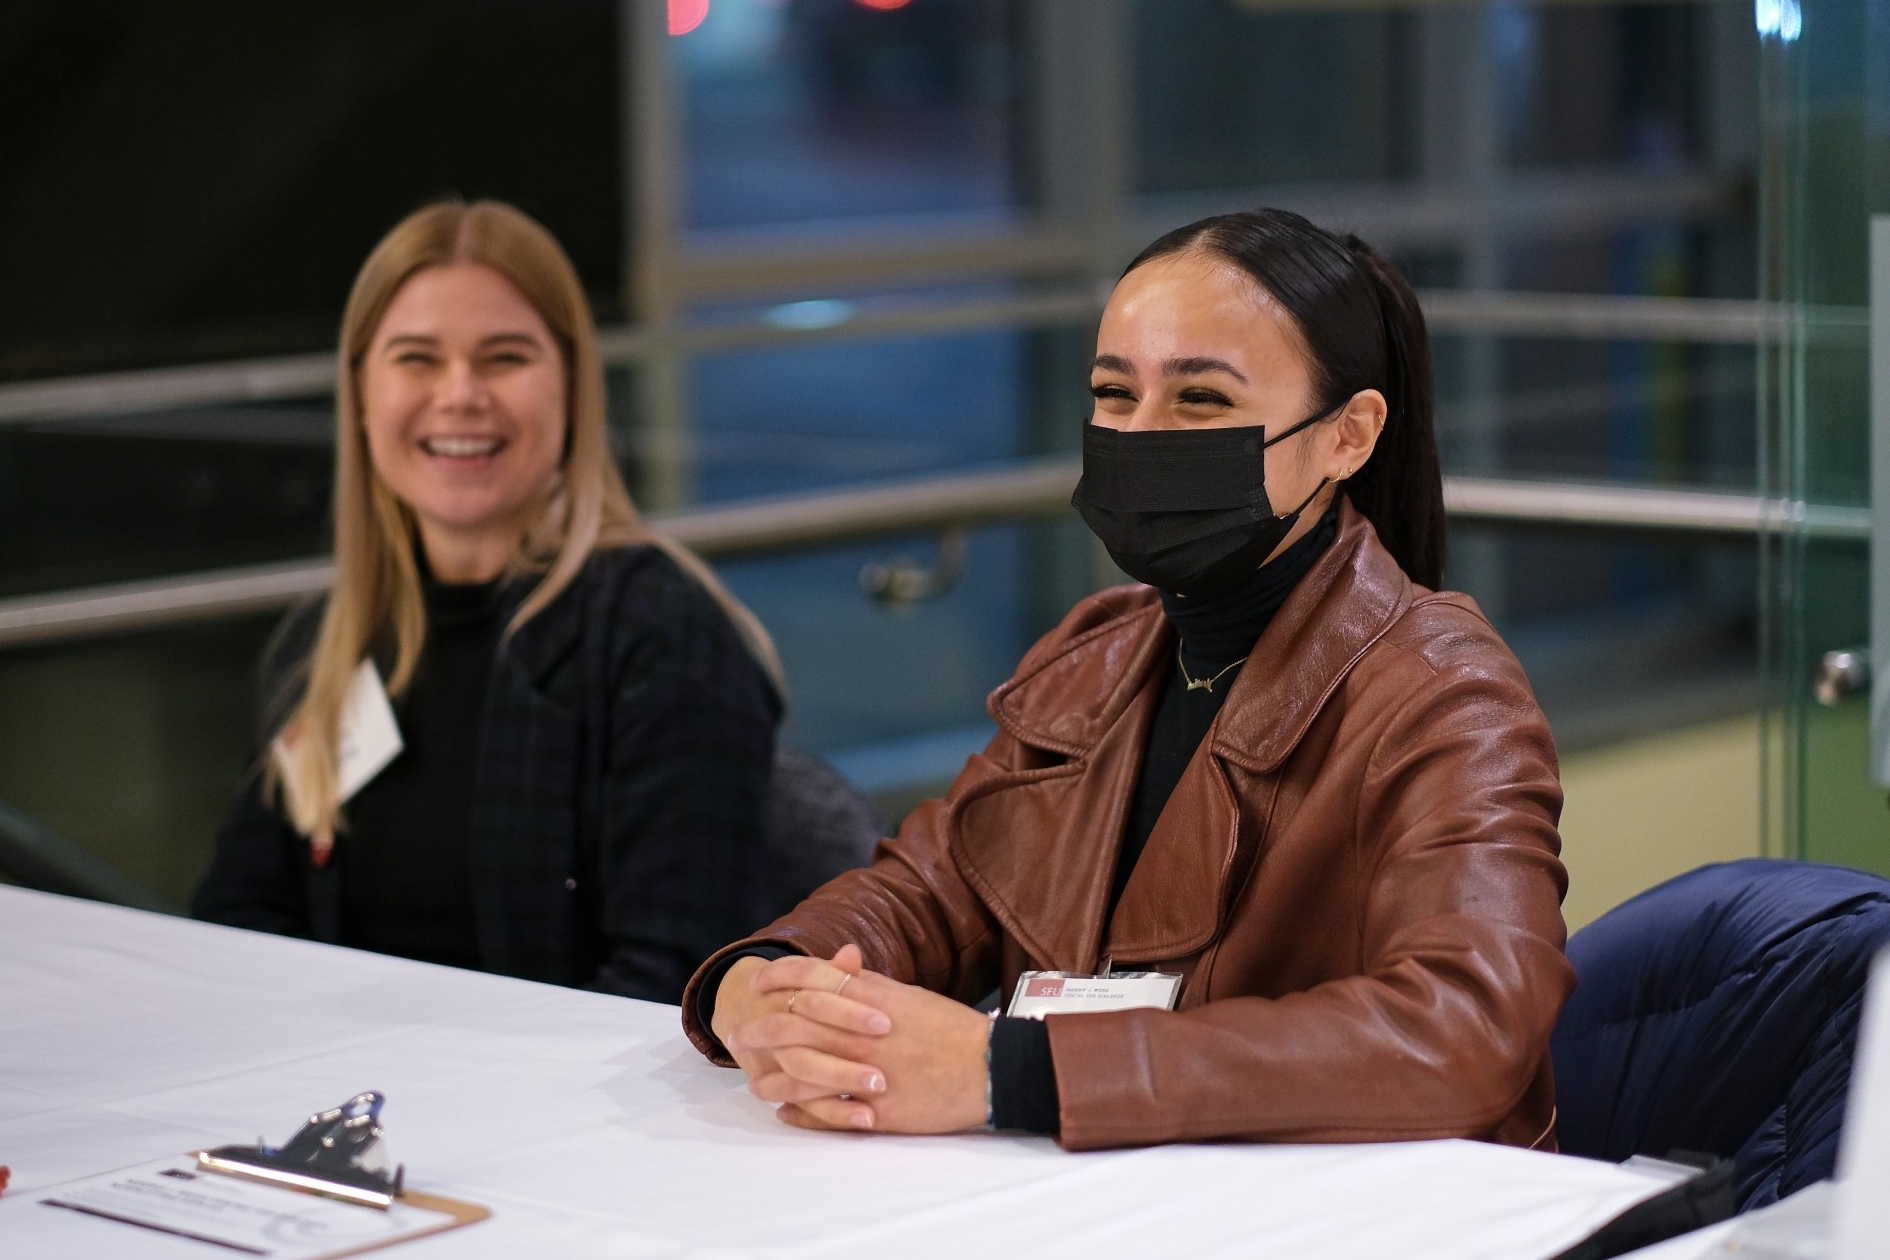 Marihah Hussainaly Farouk smiling in a mask at her work event for the Centre for Dialogue. On her left is her colleague, Karis Chitty.